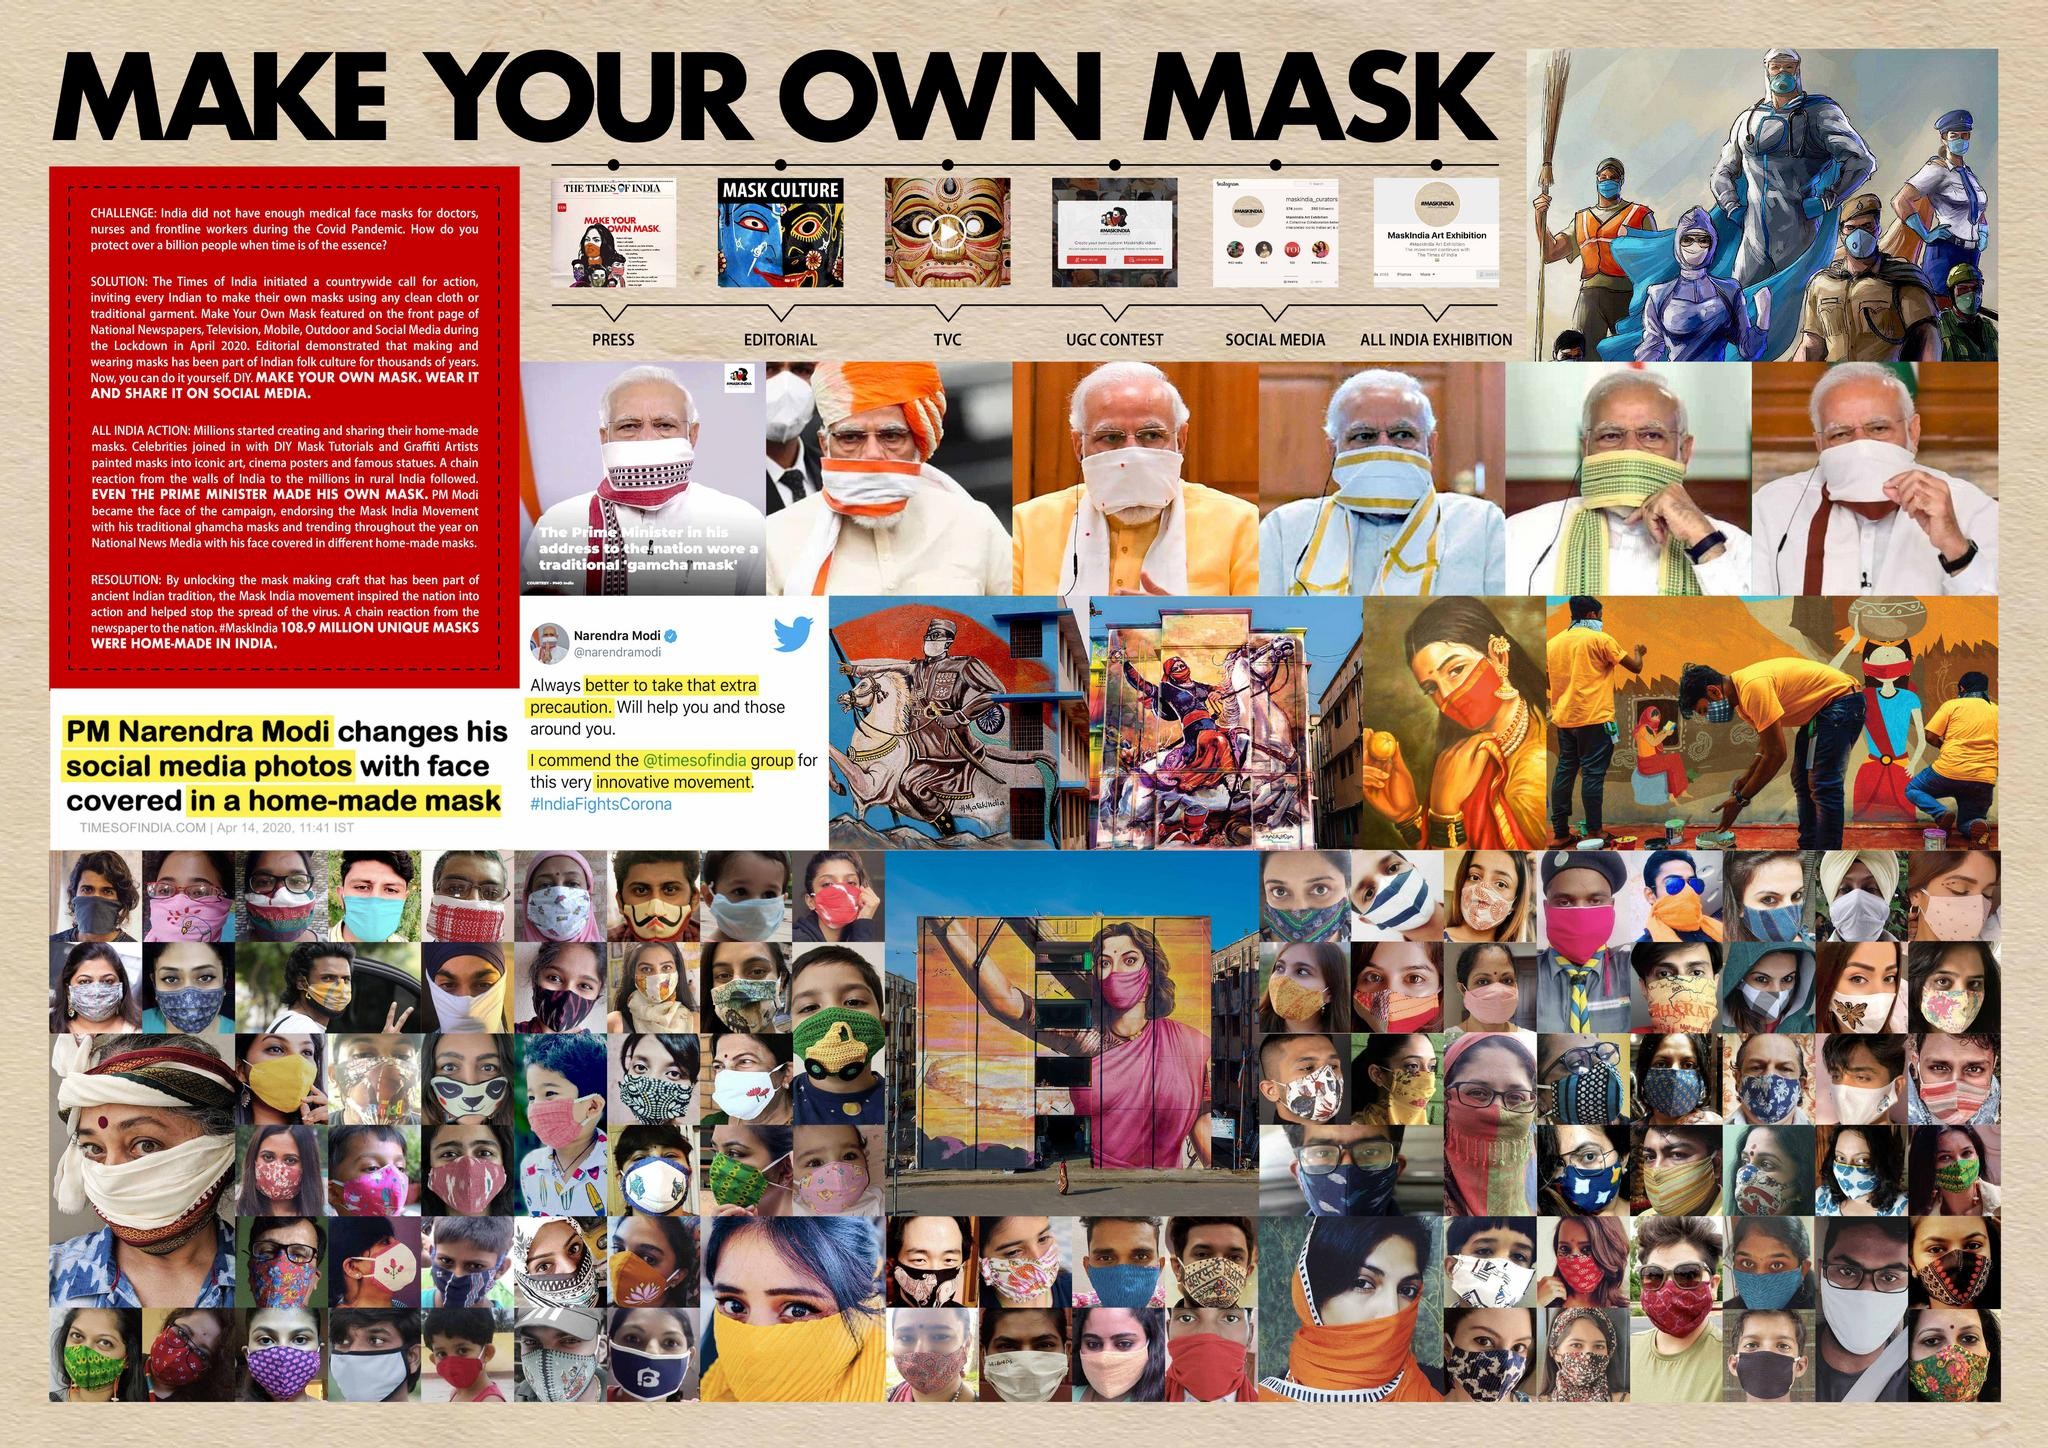 MAKE YOUR OWN MASK